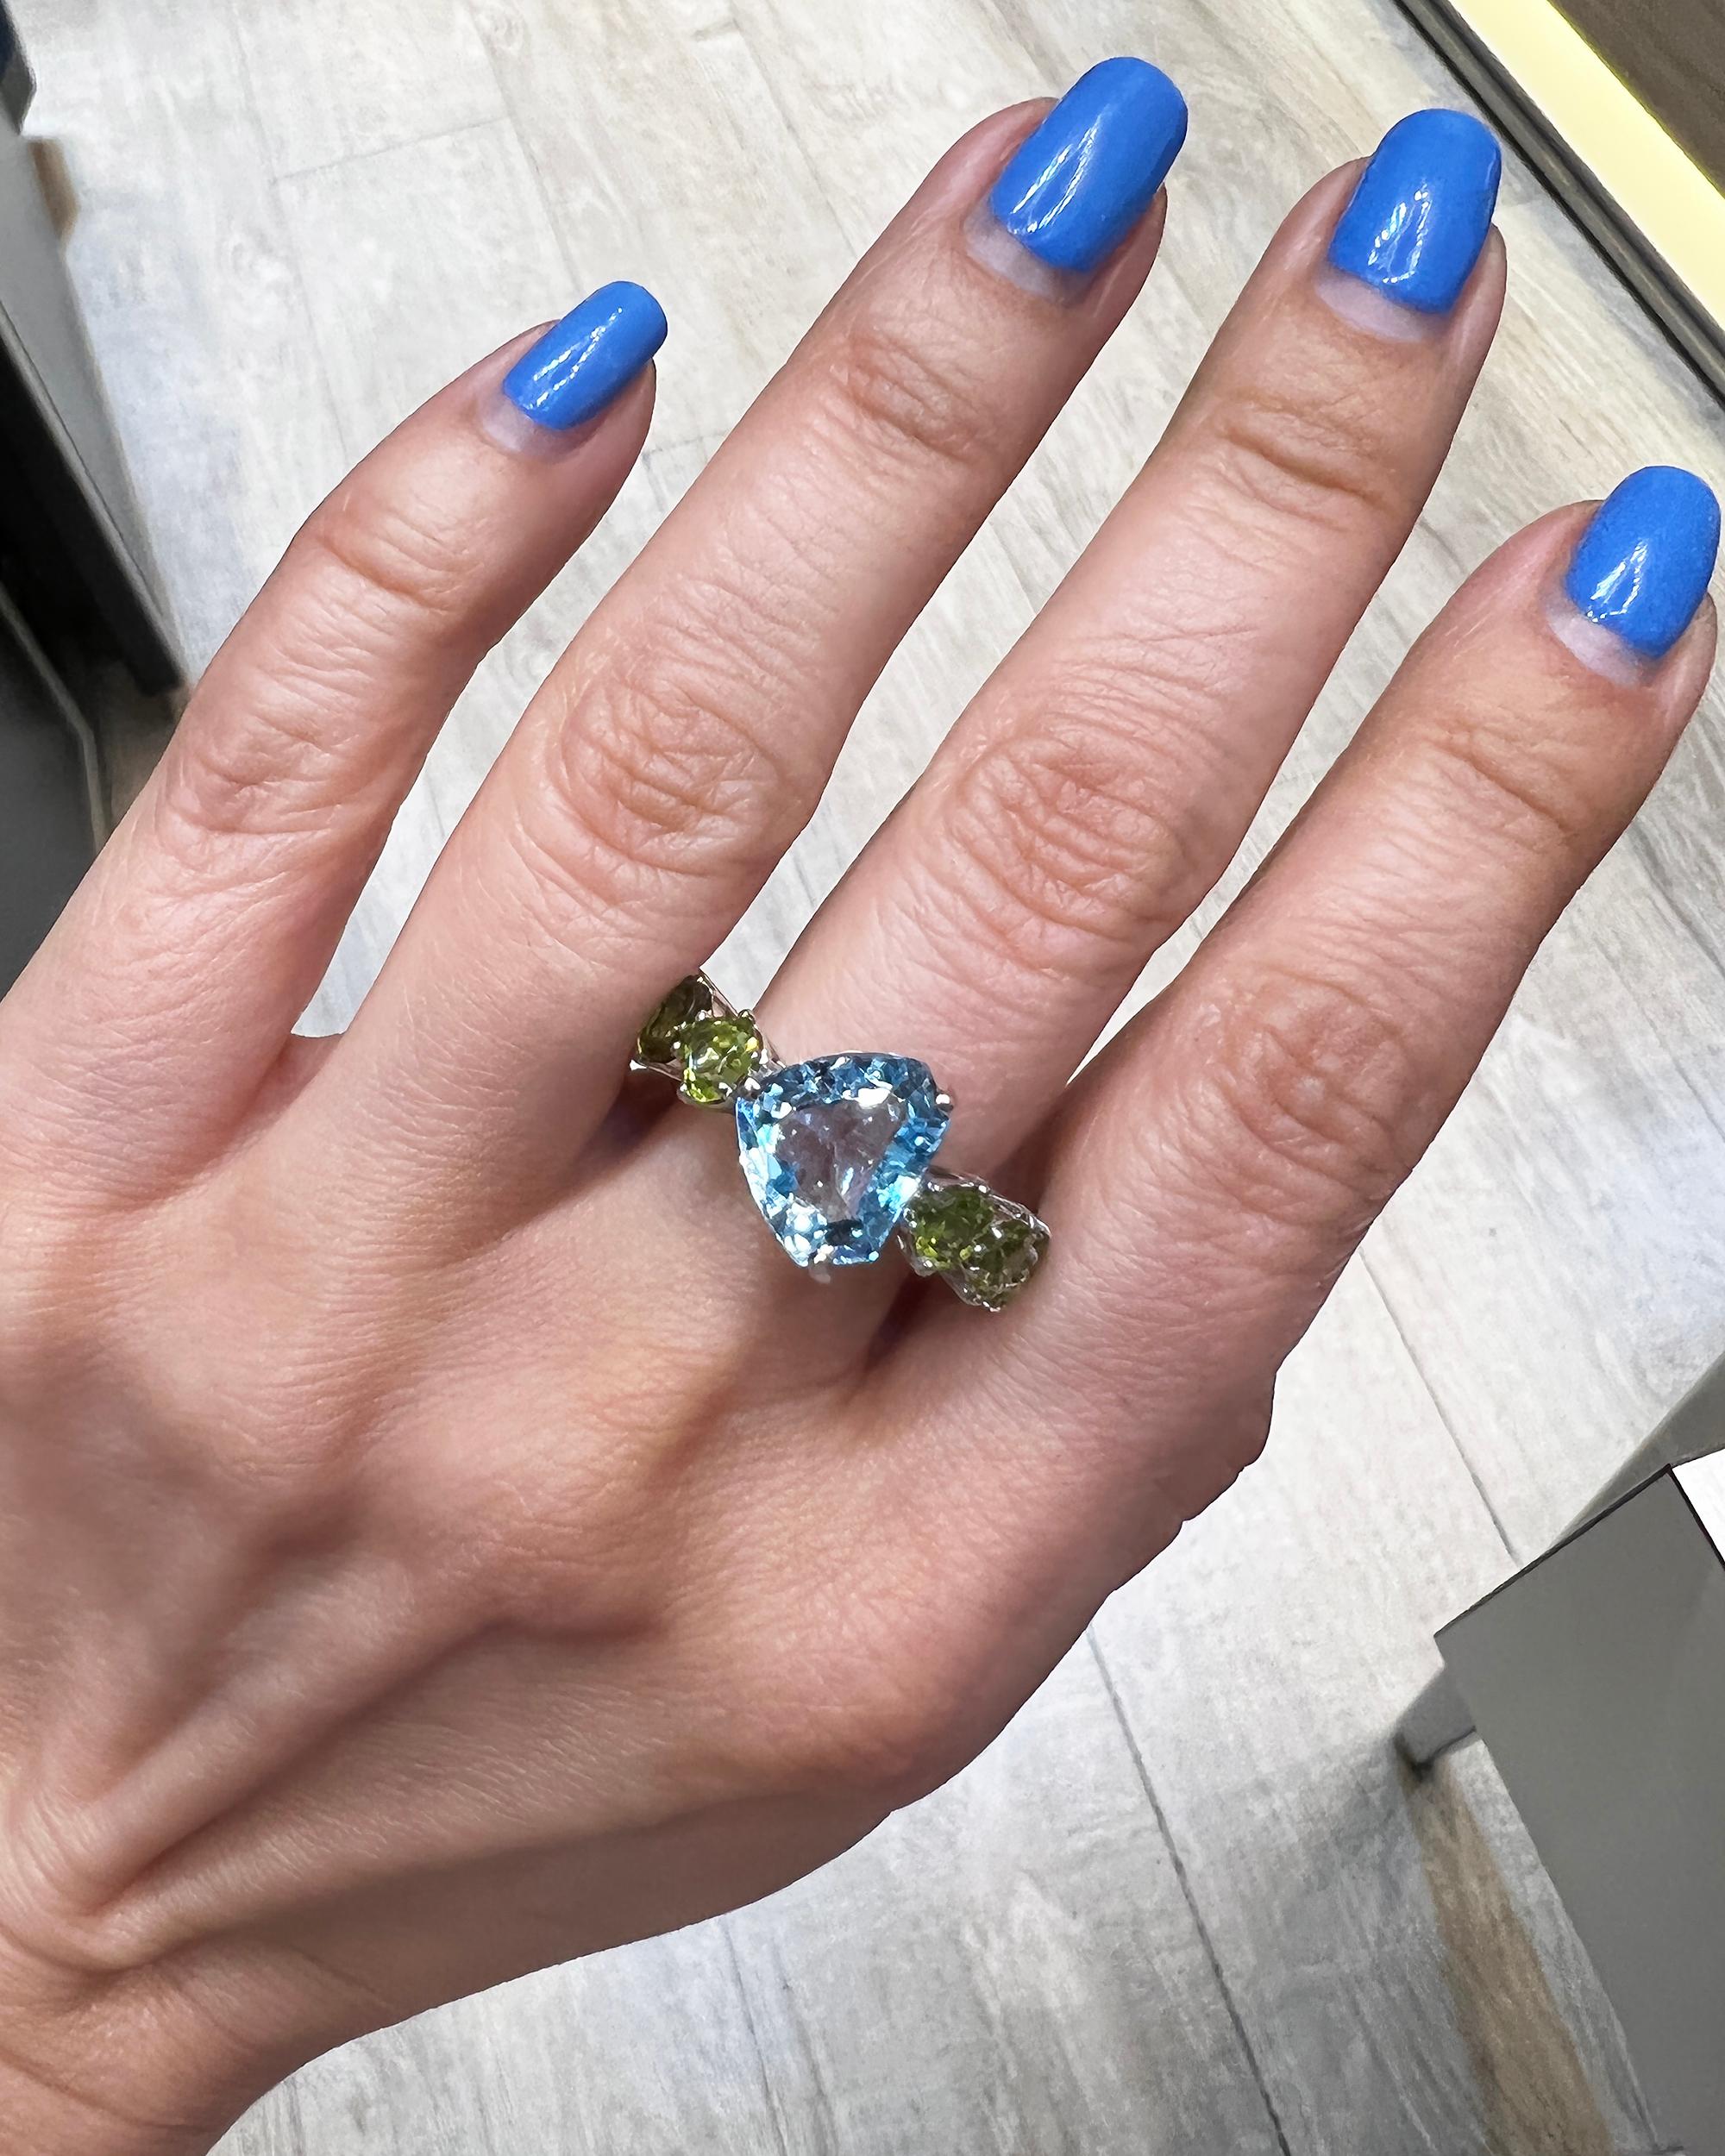 Creating an illusion of an eternity ring with stones seeming to flow around the entire band, the exceptionally bold and fun cocktail ring made in Italy in the 21st century, 2018, is crafted in 18K white gold and features a vibrant blue topaz